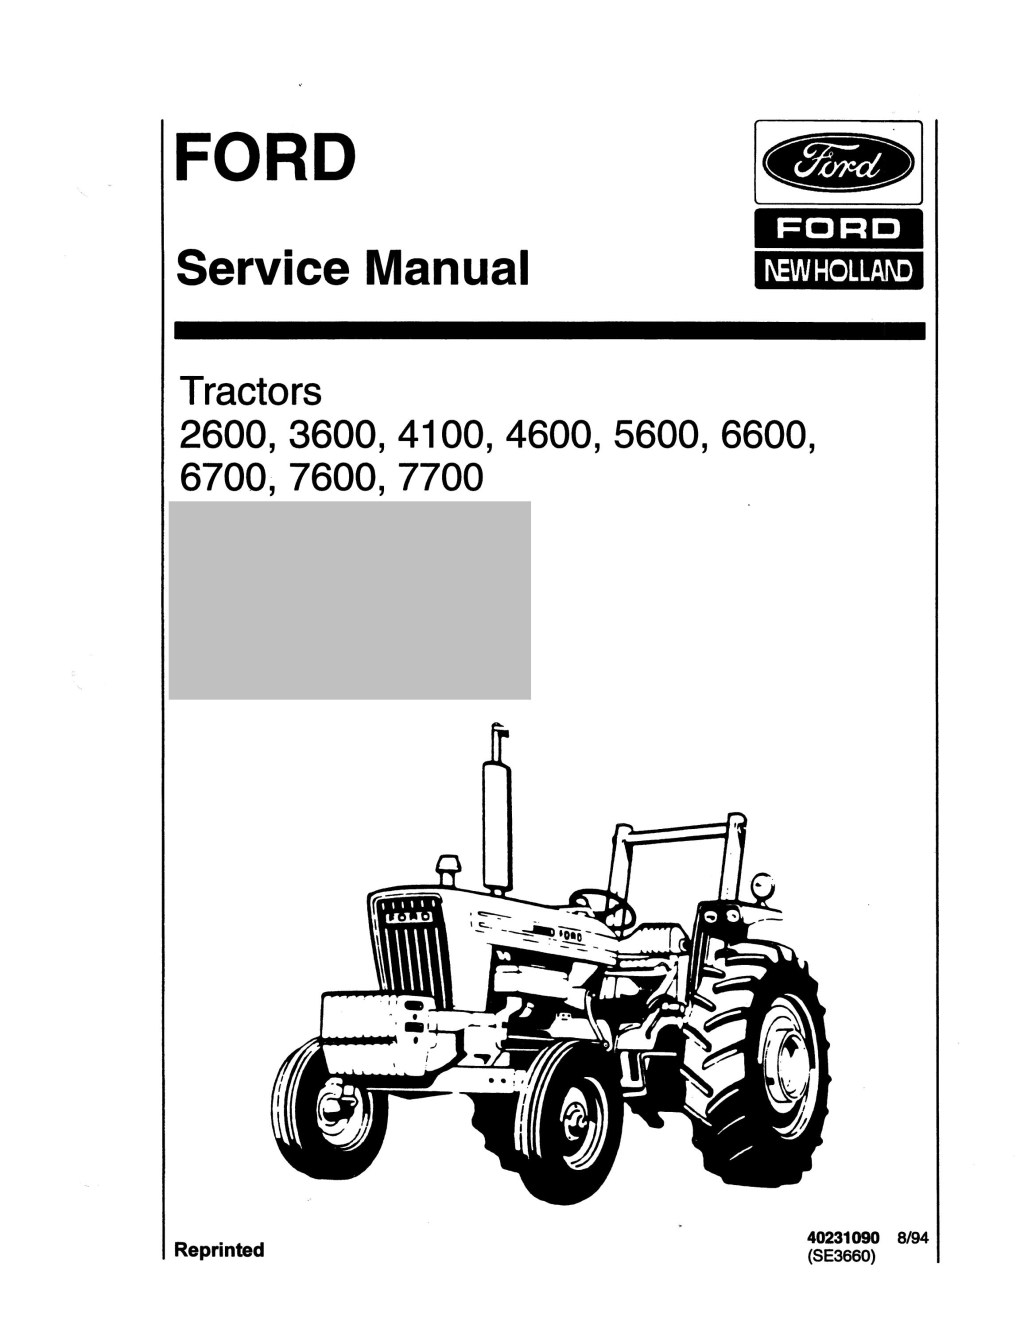 Picture of: Ford  Tractor Service Repair Manual by ieodkdksmmnv – Issuu